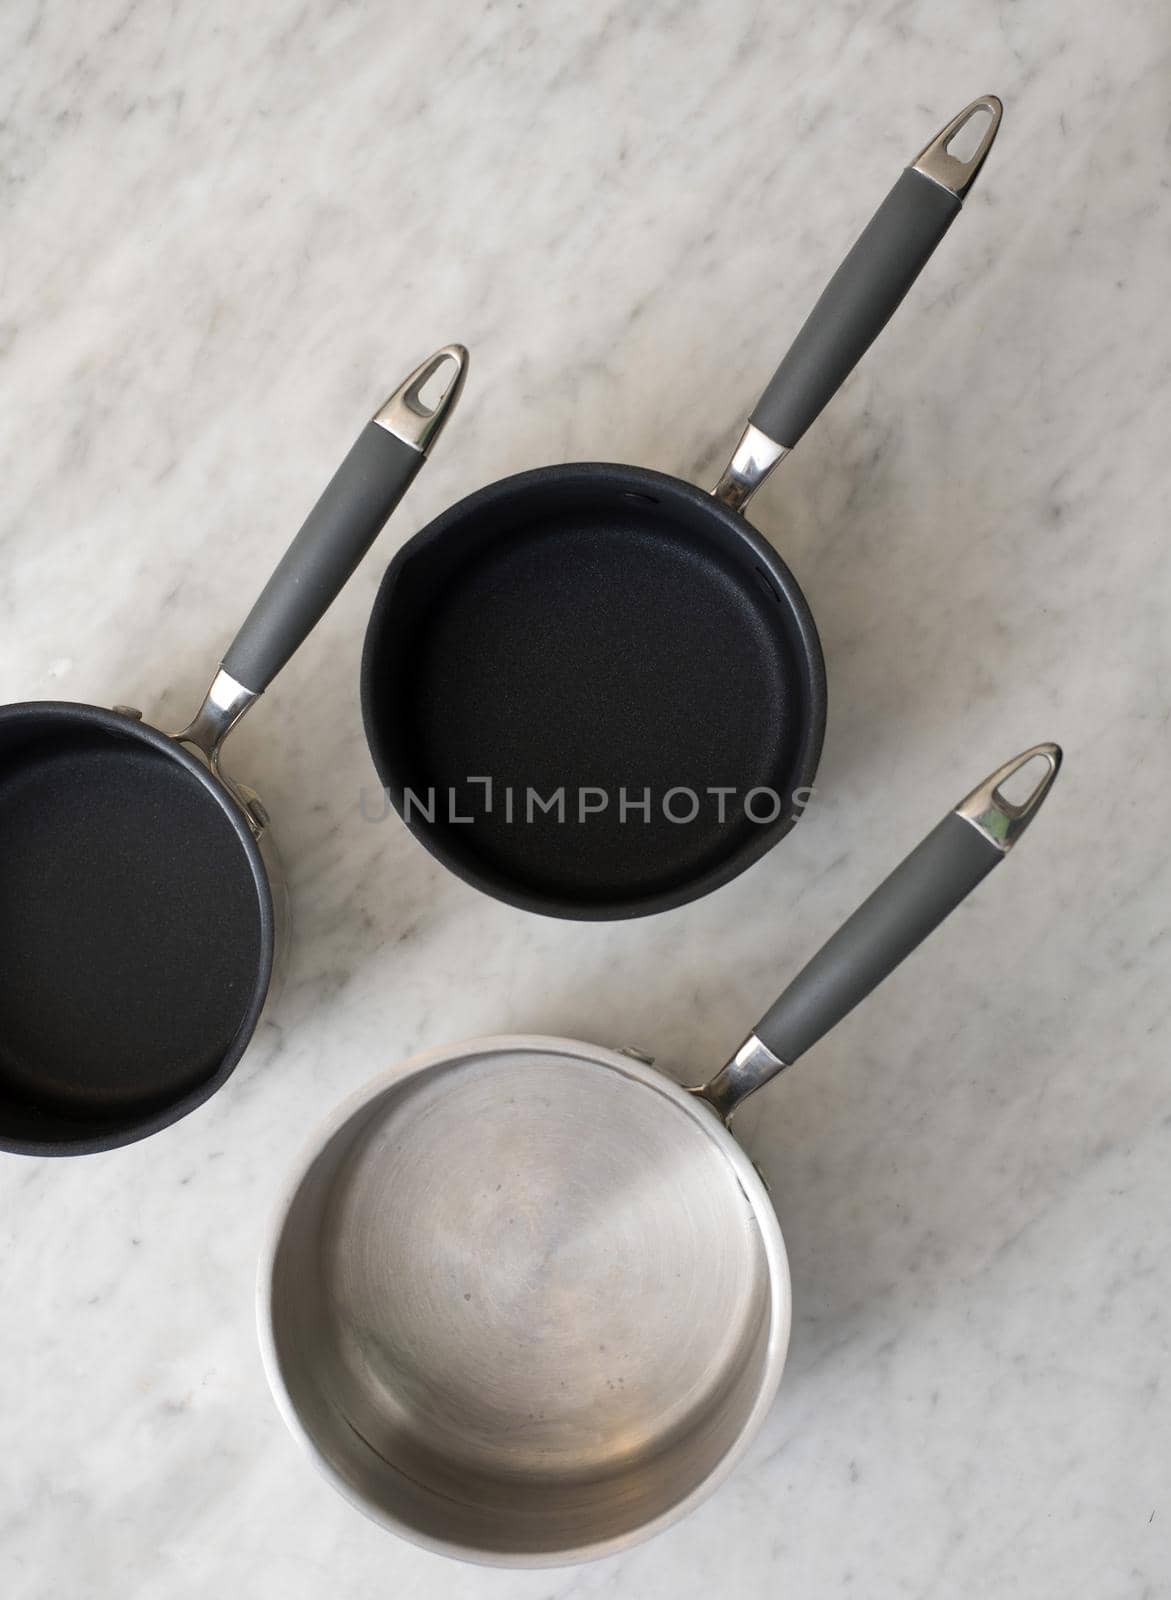 Three empty clean metal pots or saucepans viewed from above on a mottled grey surface in a food and cookery concept